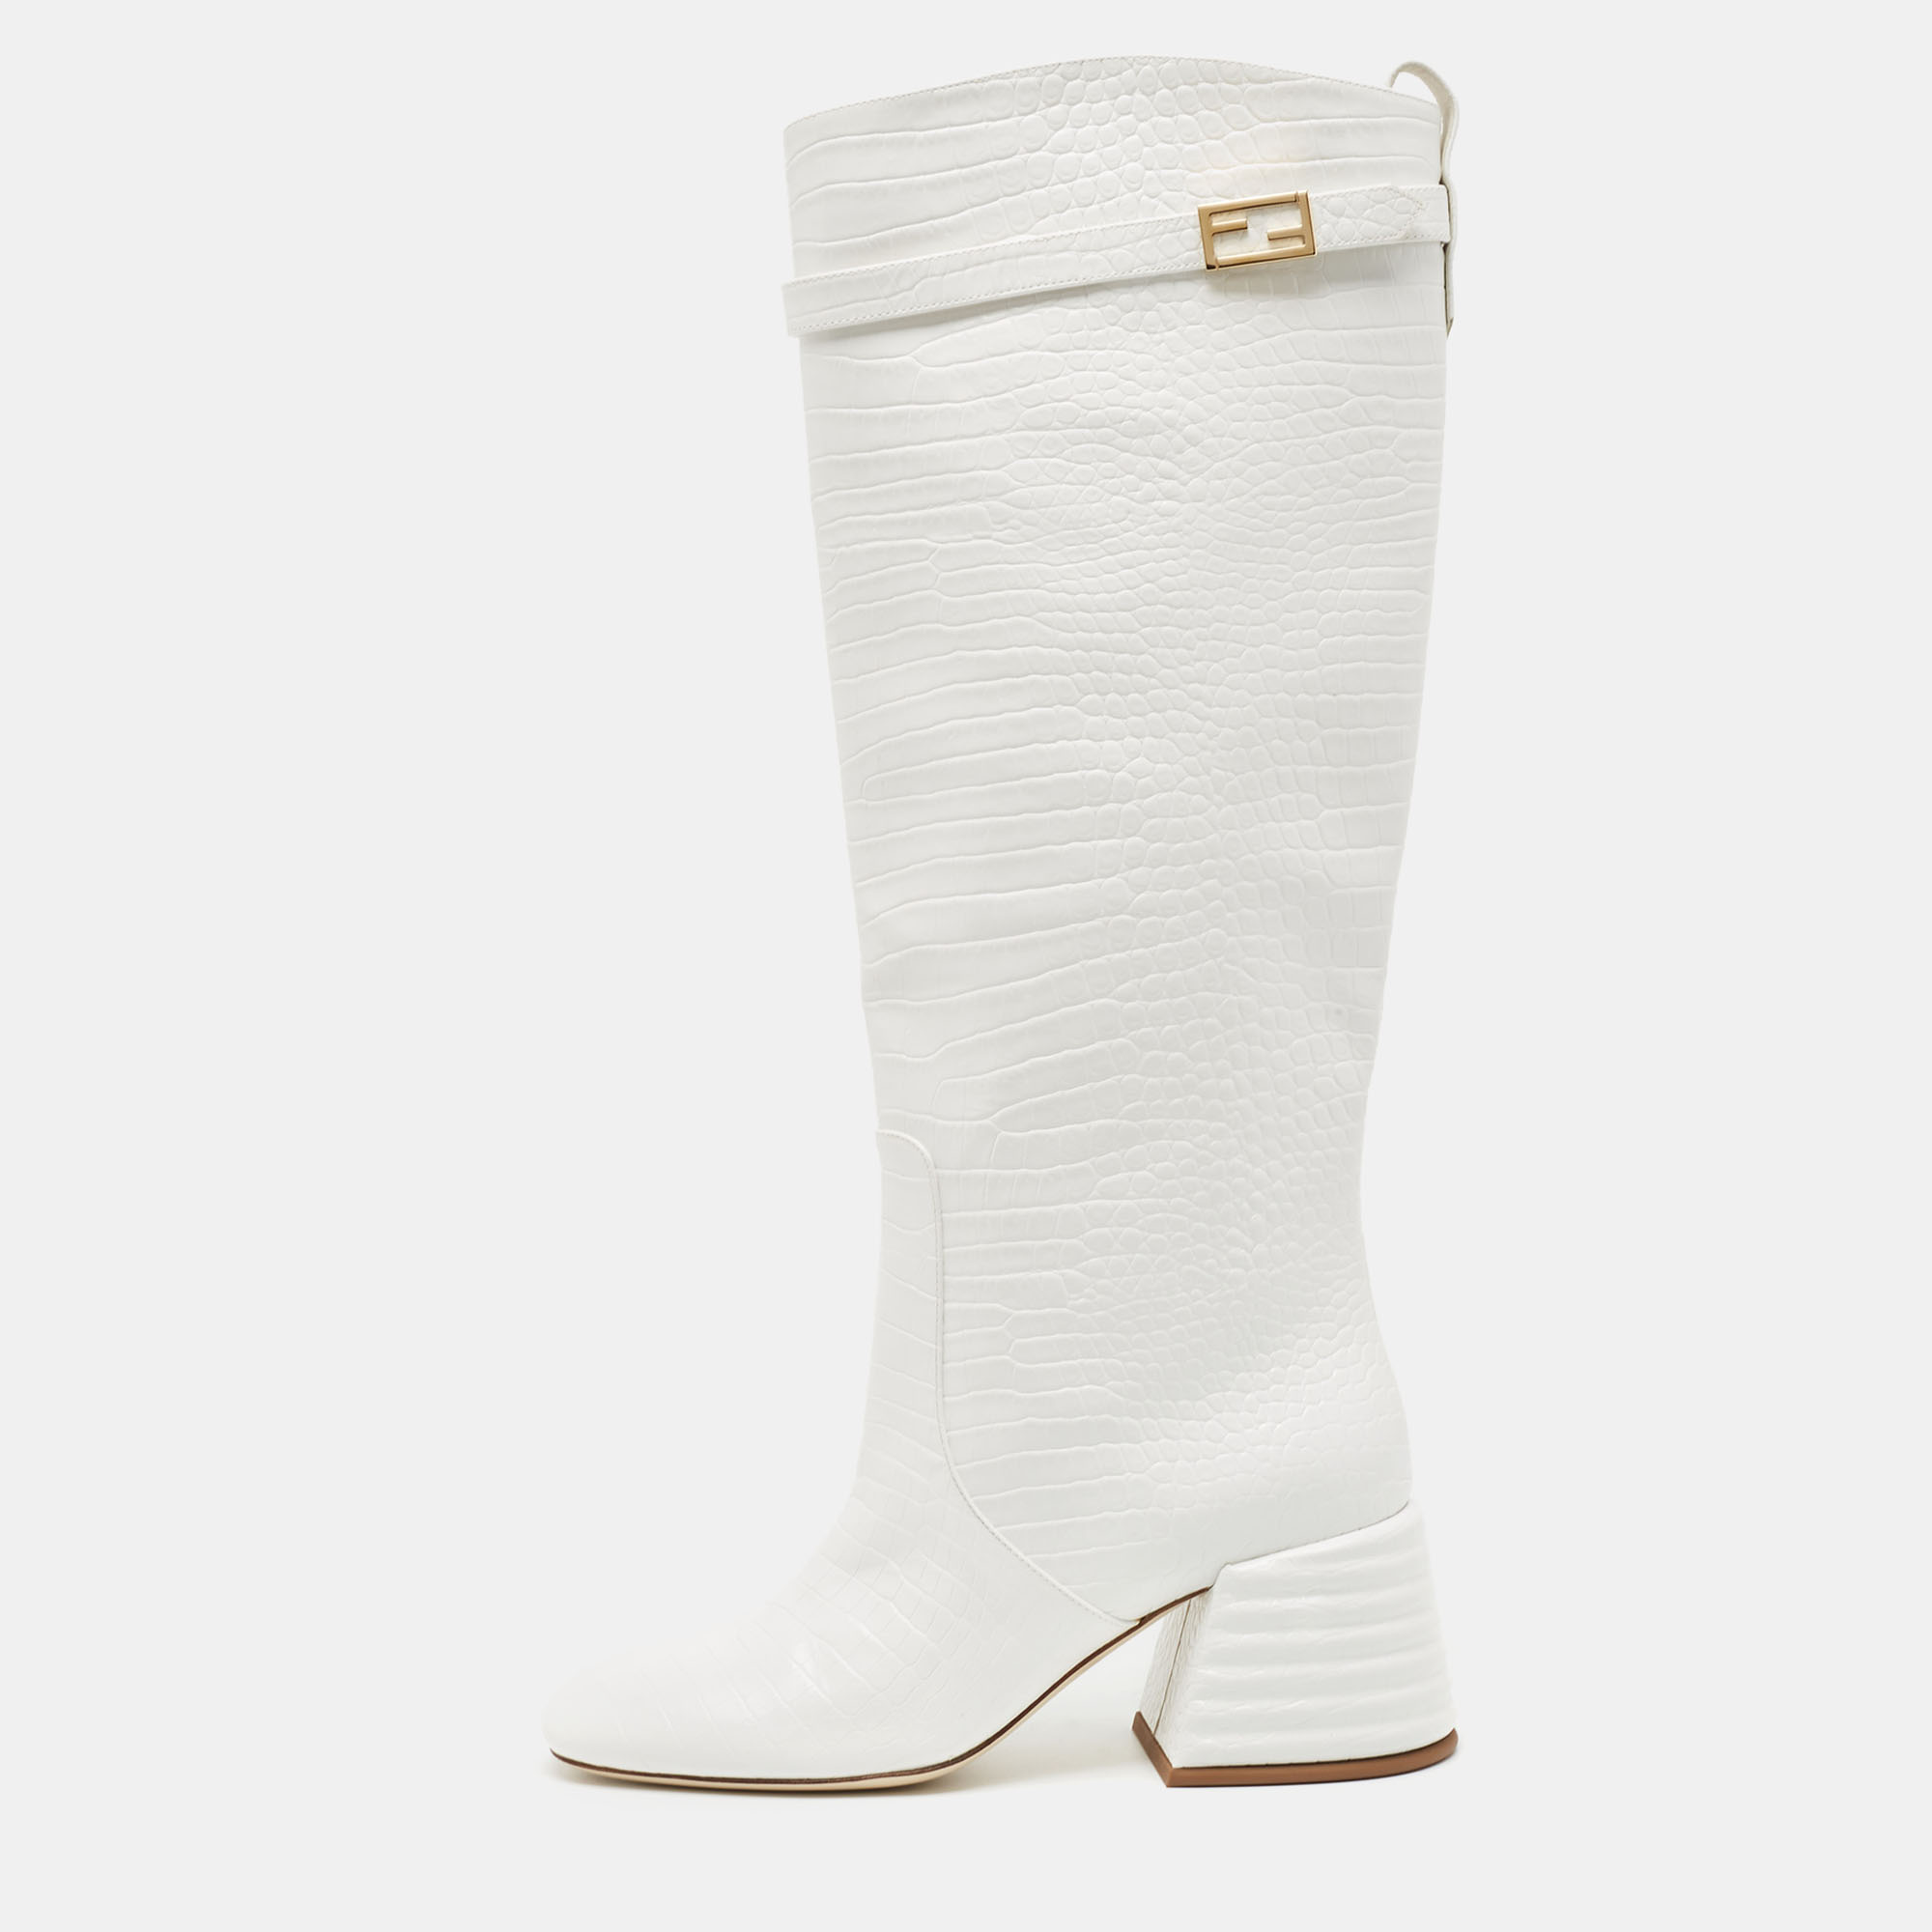 Pre-owned Fendi White Croc Embossed Leather Promenade Knee Length Boots Size 38